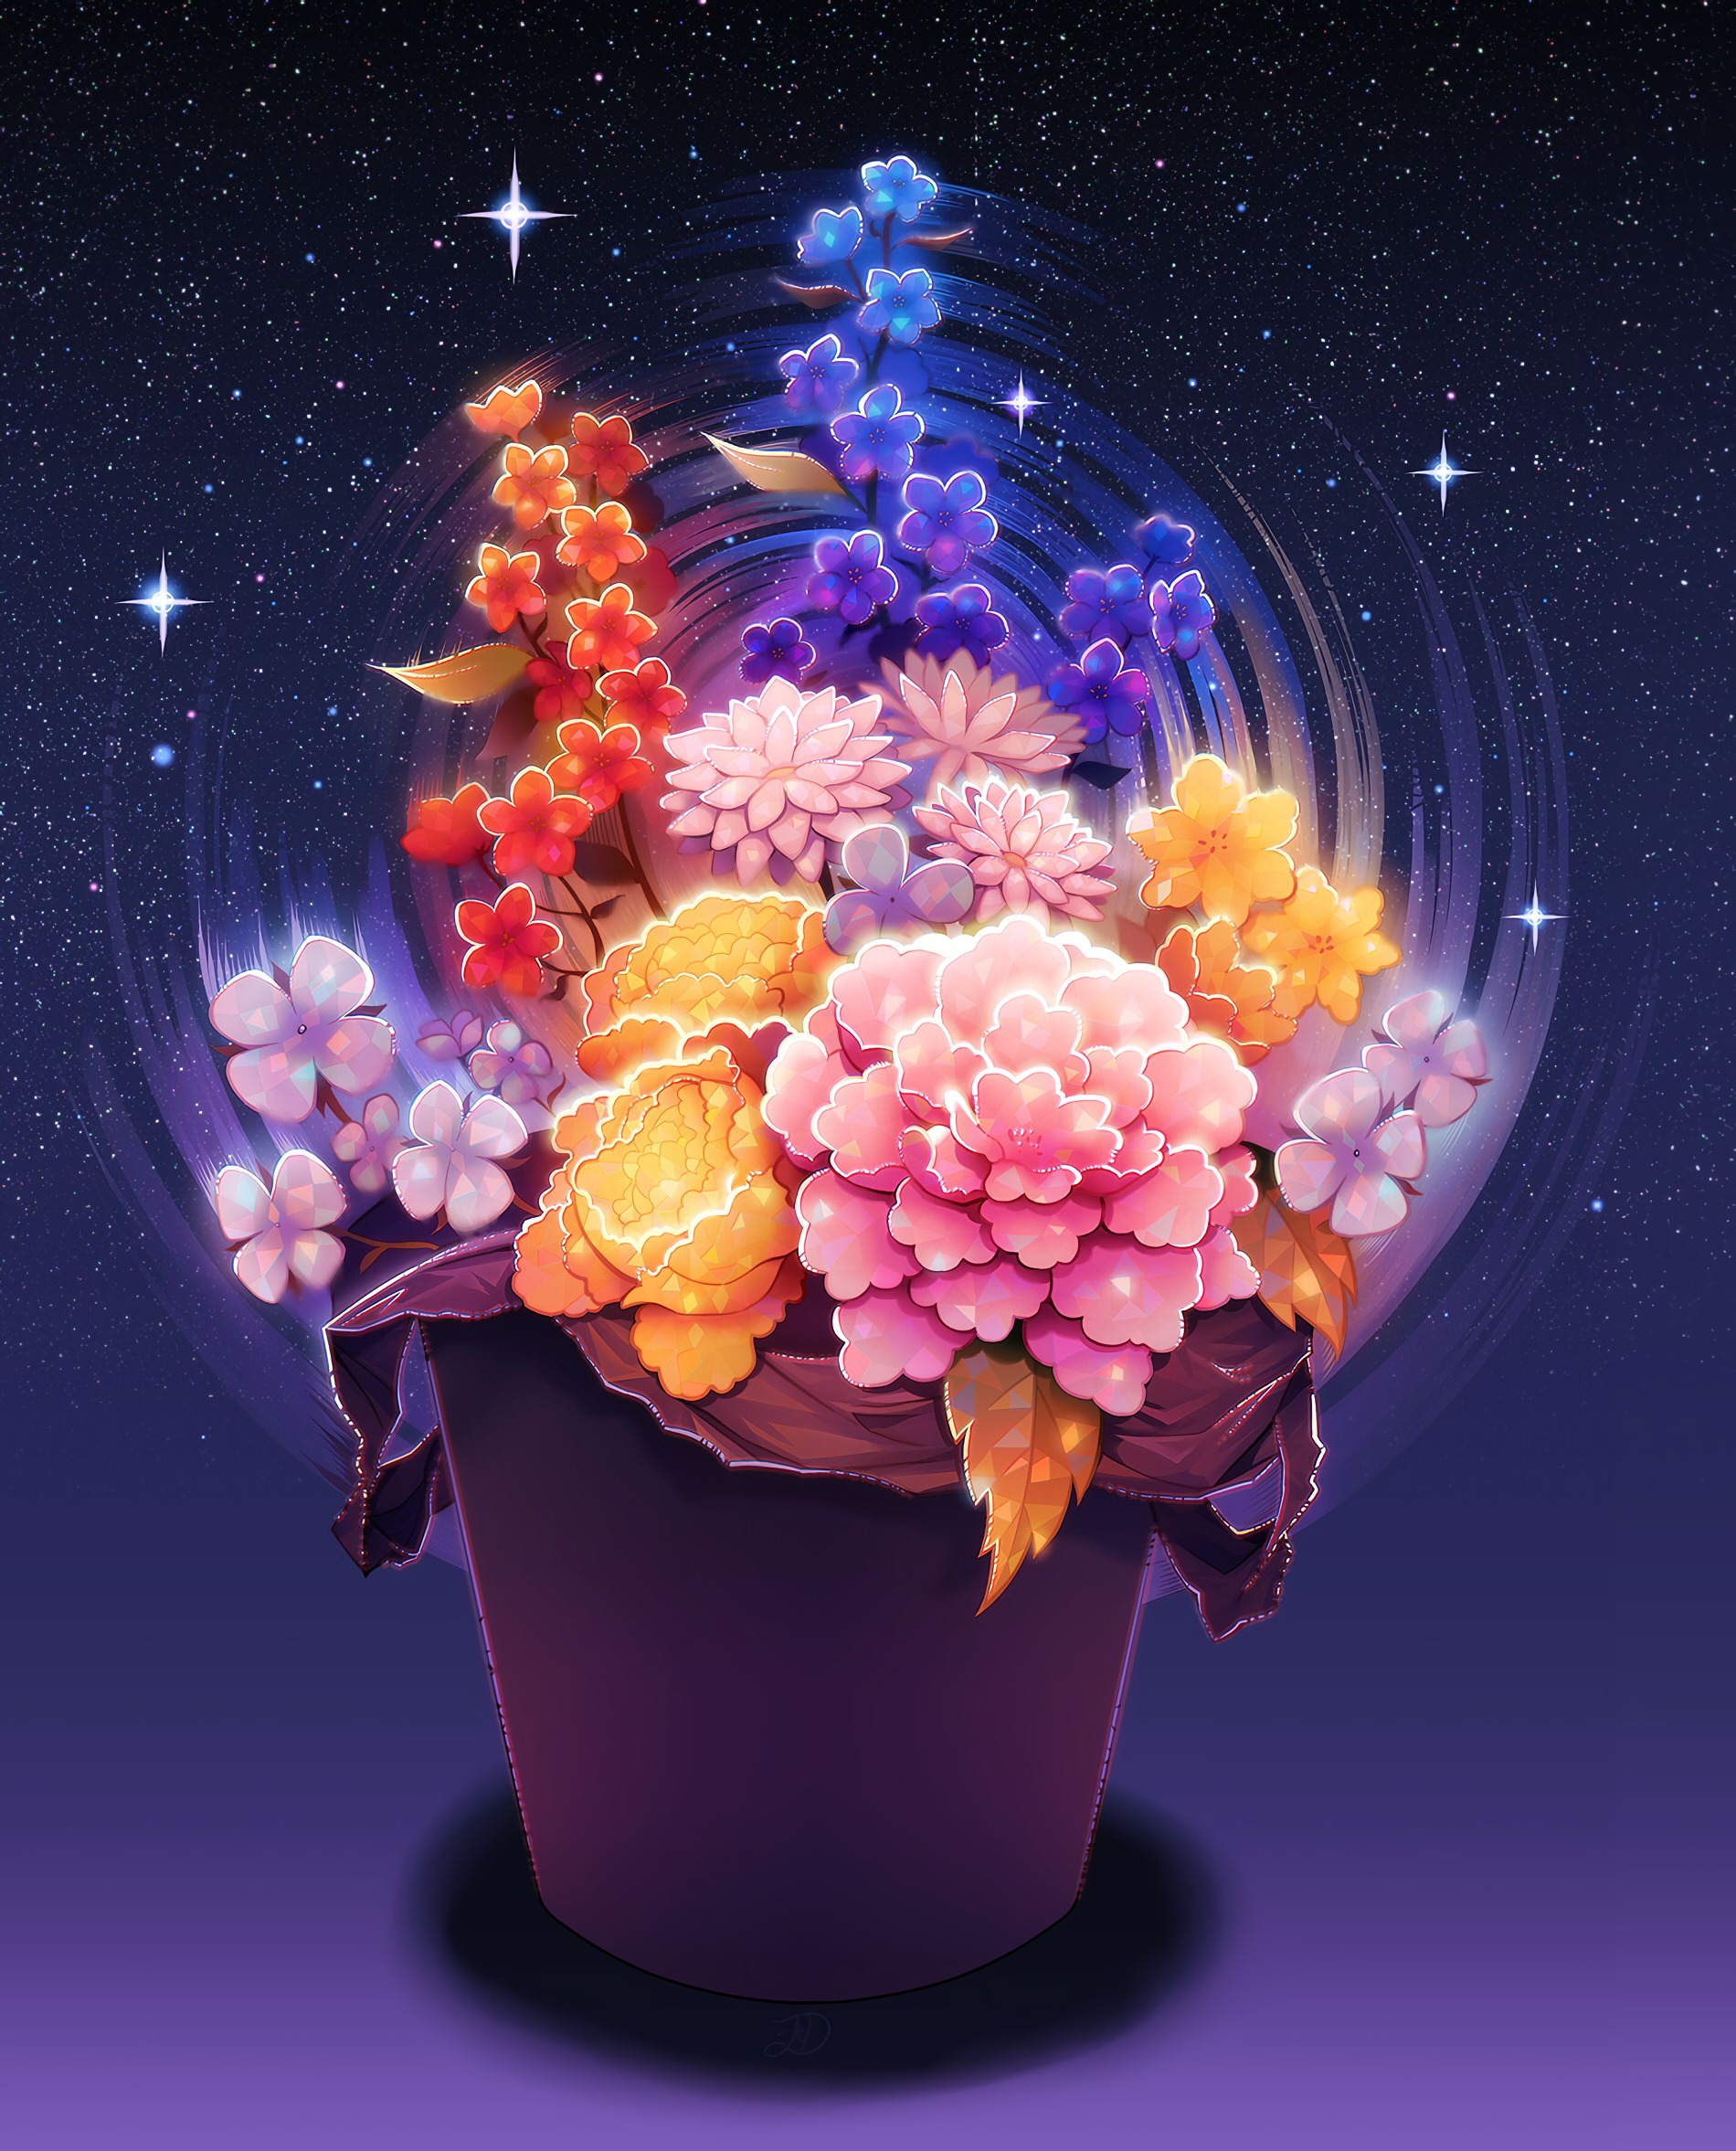 art, universe, flowers, starry sky home screen for smartphone